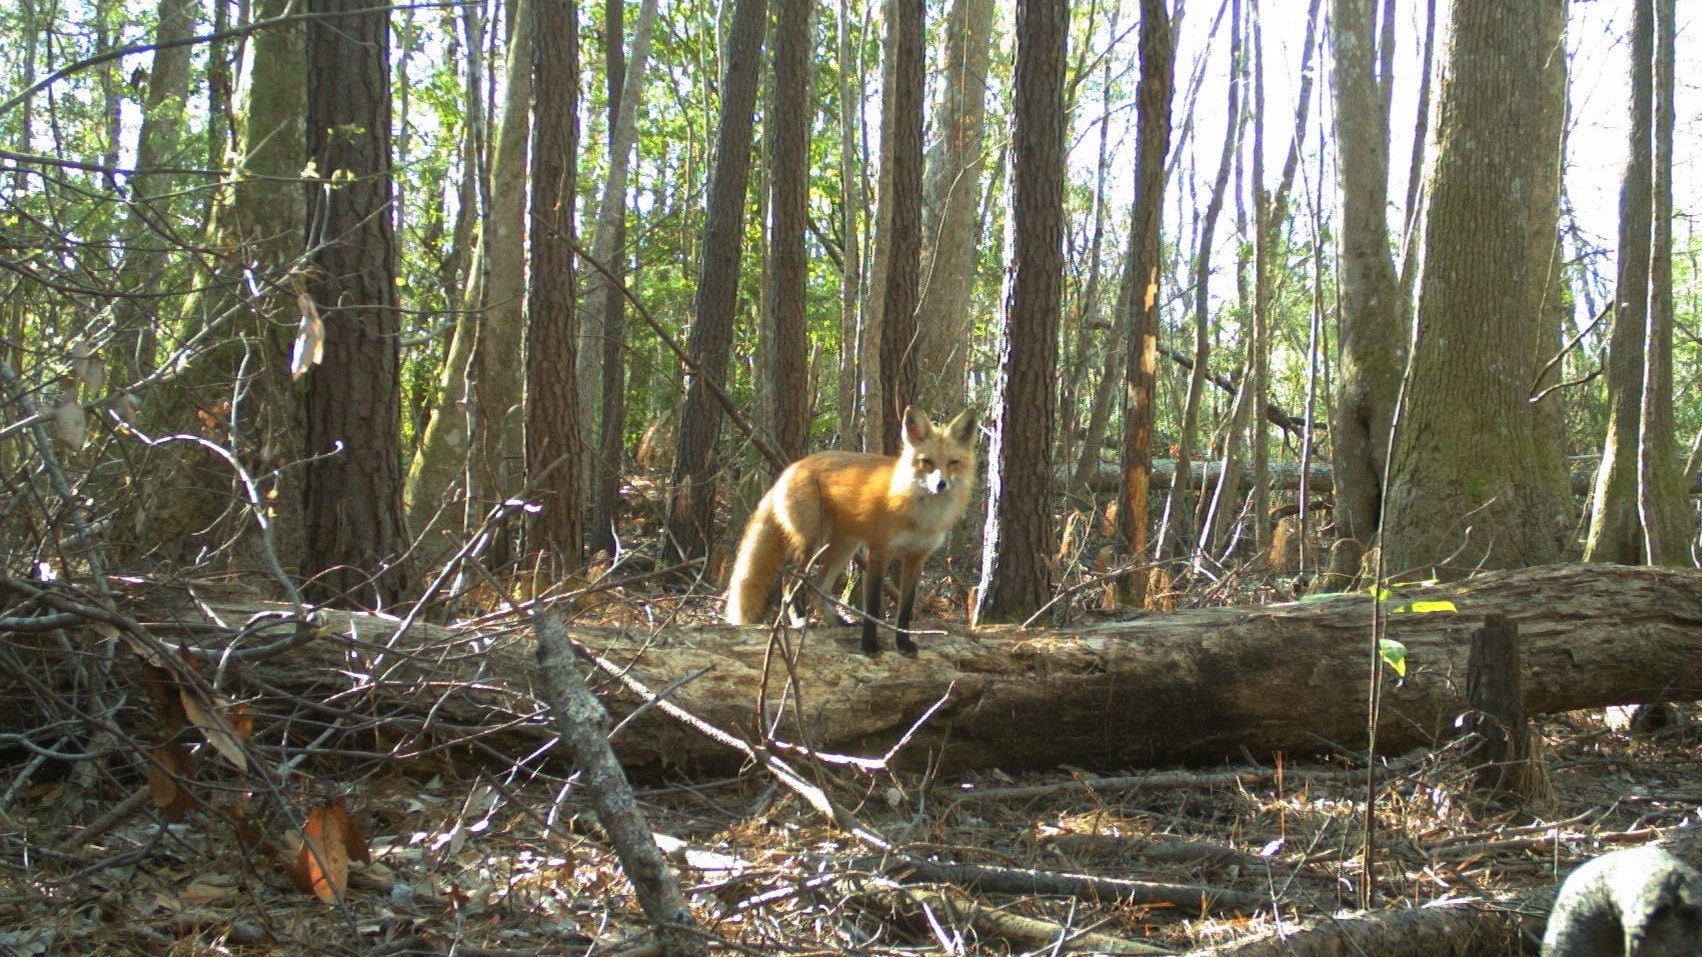 Red fox in a forest - How Linked Data, Artificial Intelligence Could Help Animals - College of Natural Resources NC State University